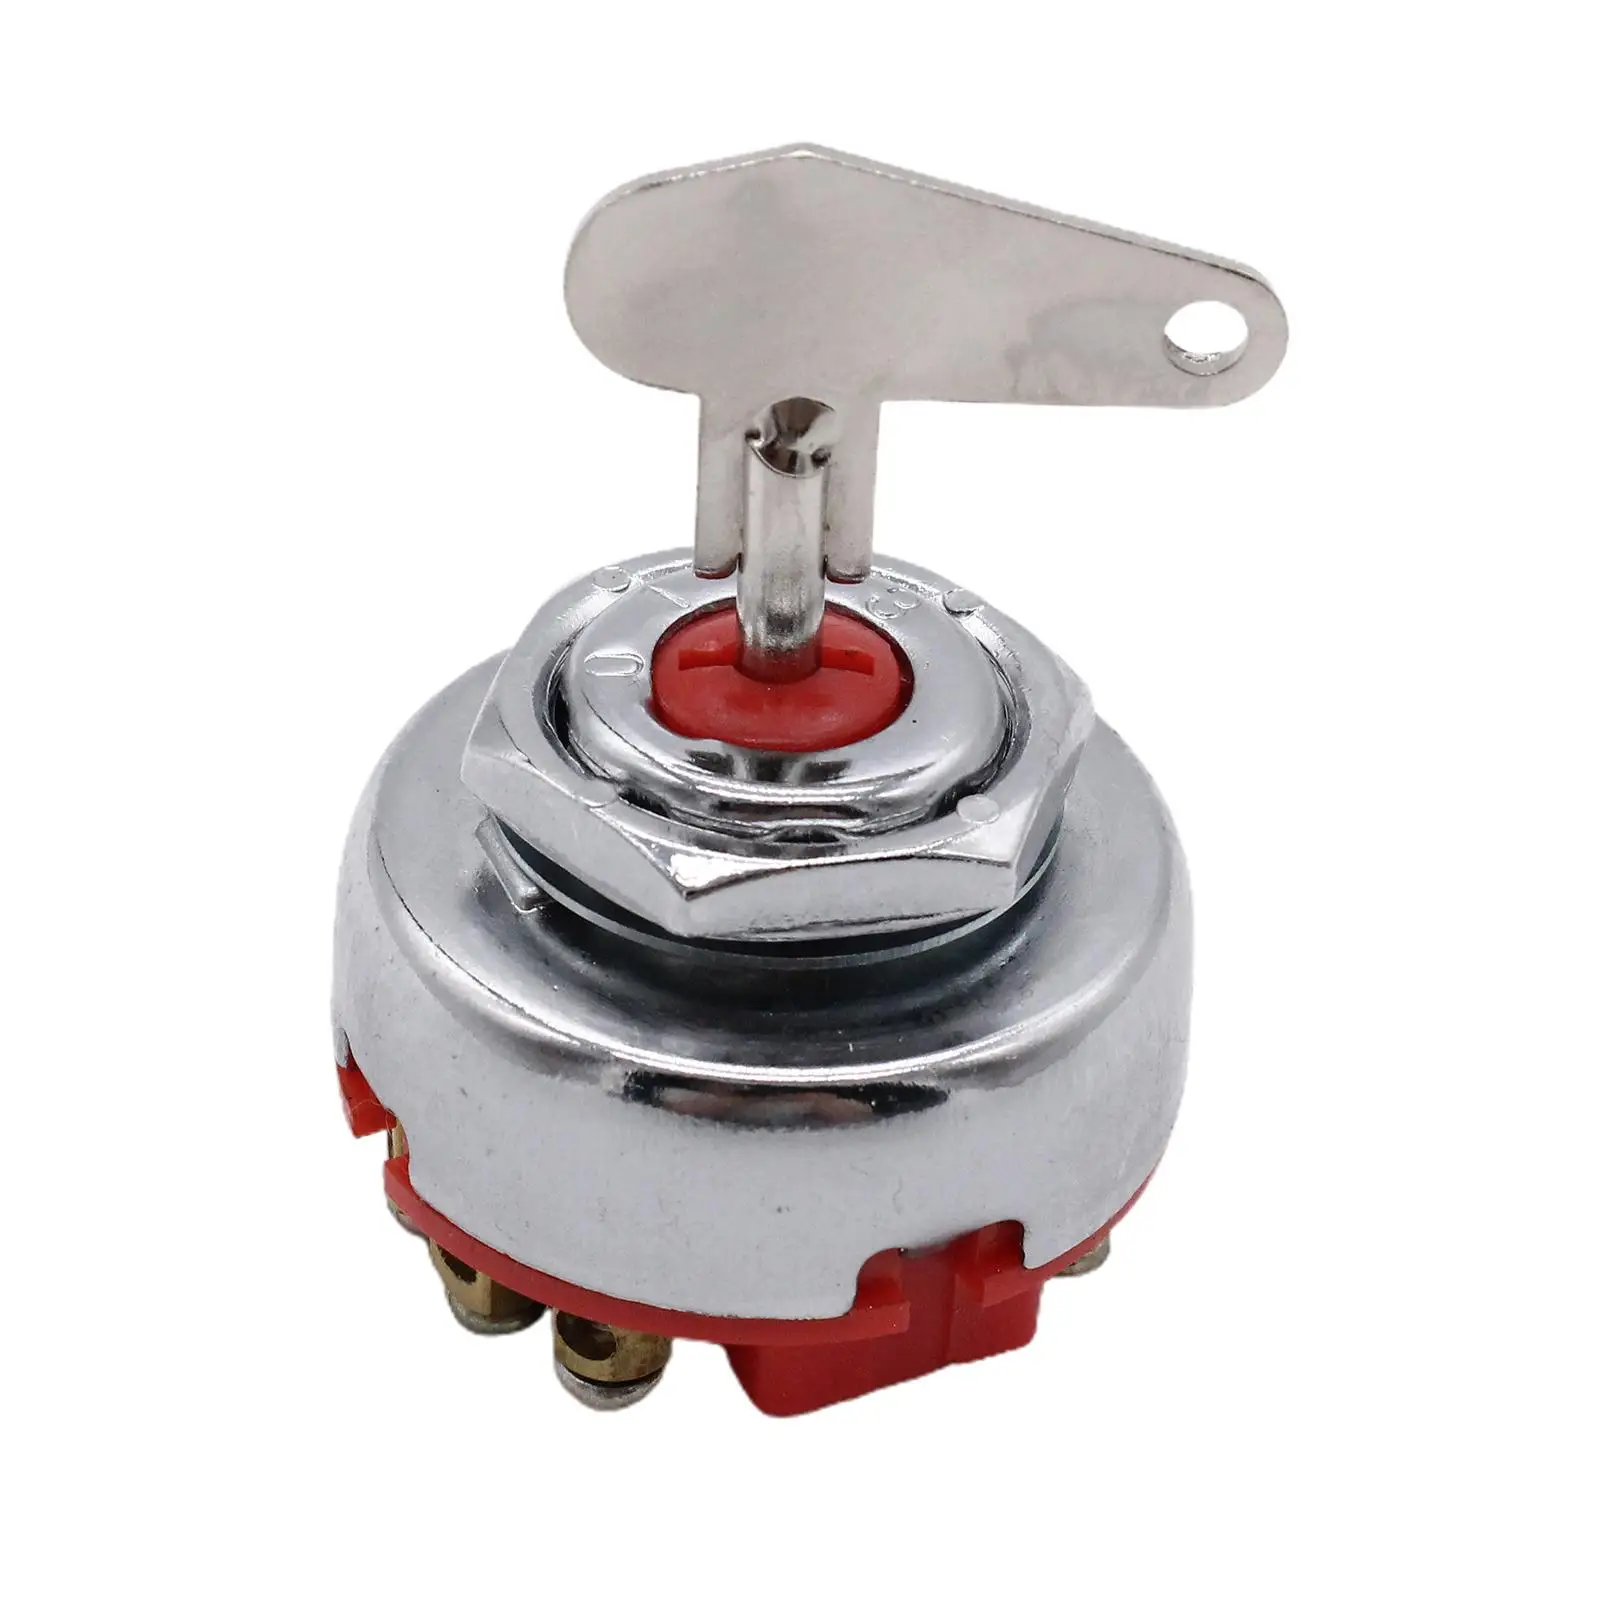 Ignition Switch 8 Pole Repair Part W/Key High Strength for Tractor high strength, sturdy and durable.